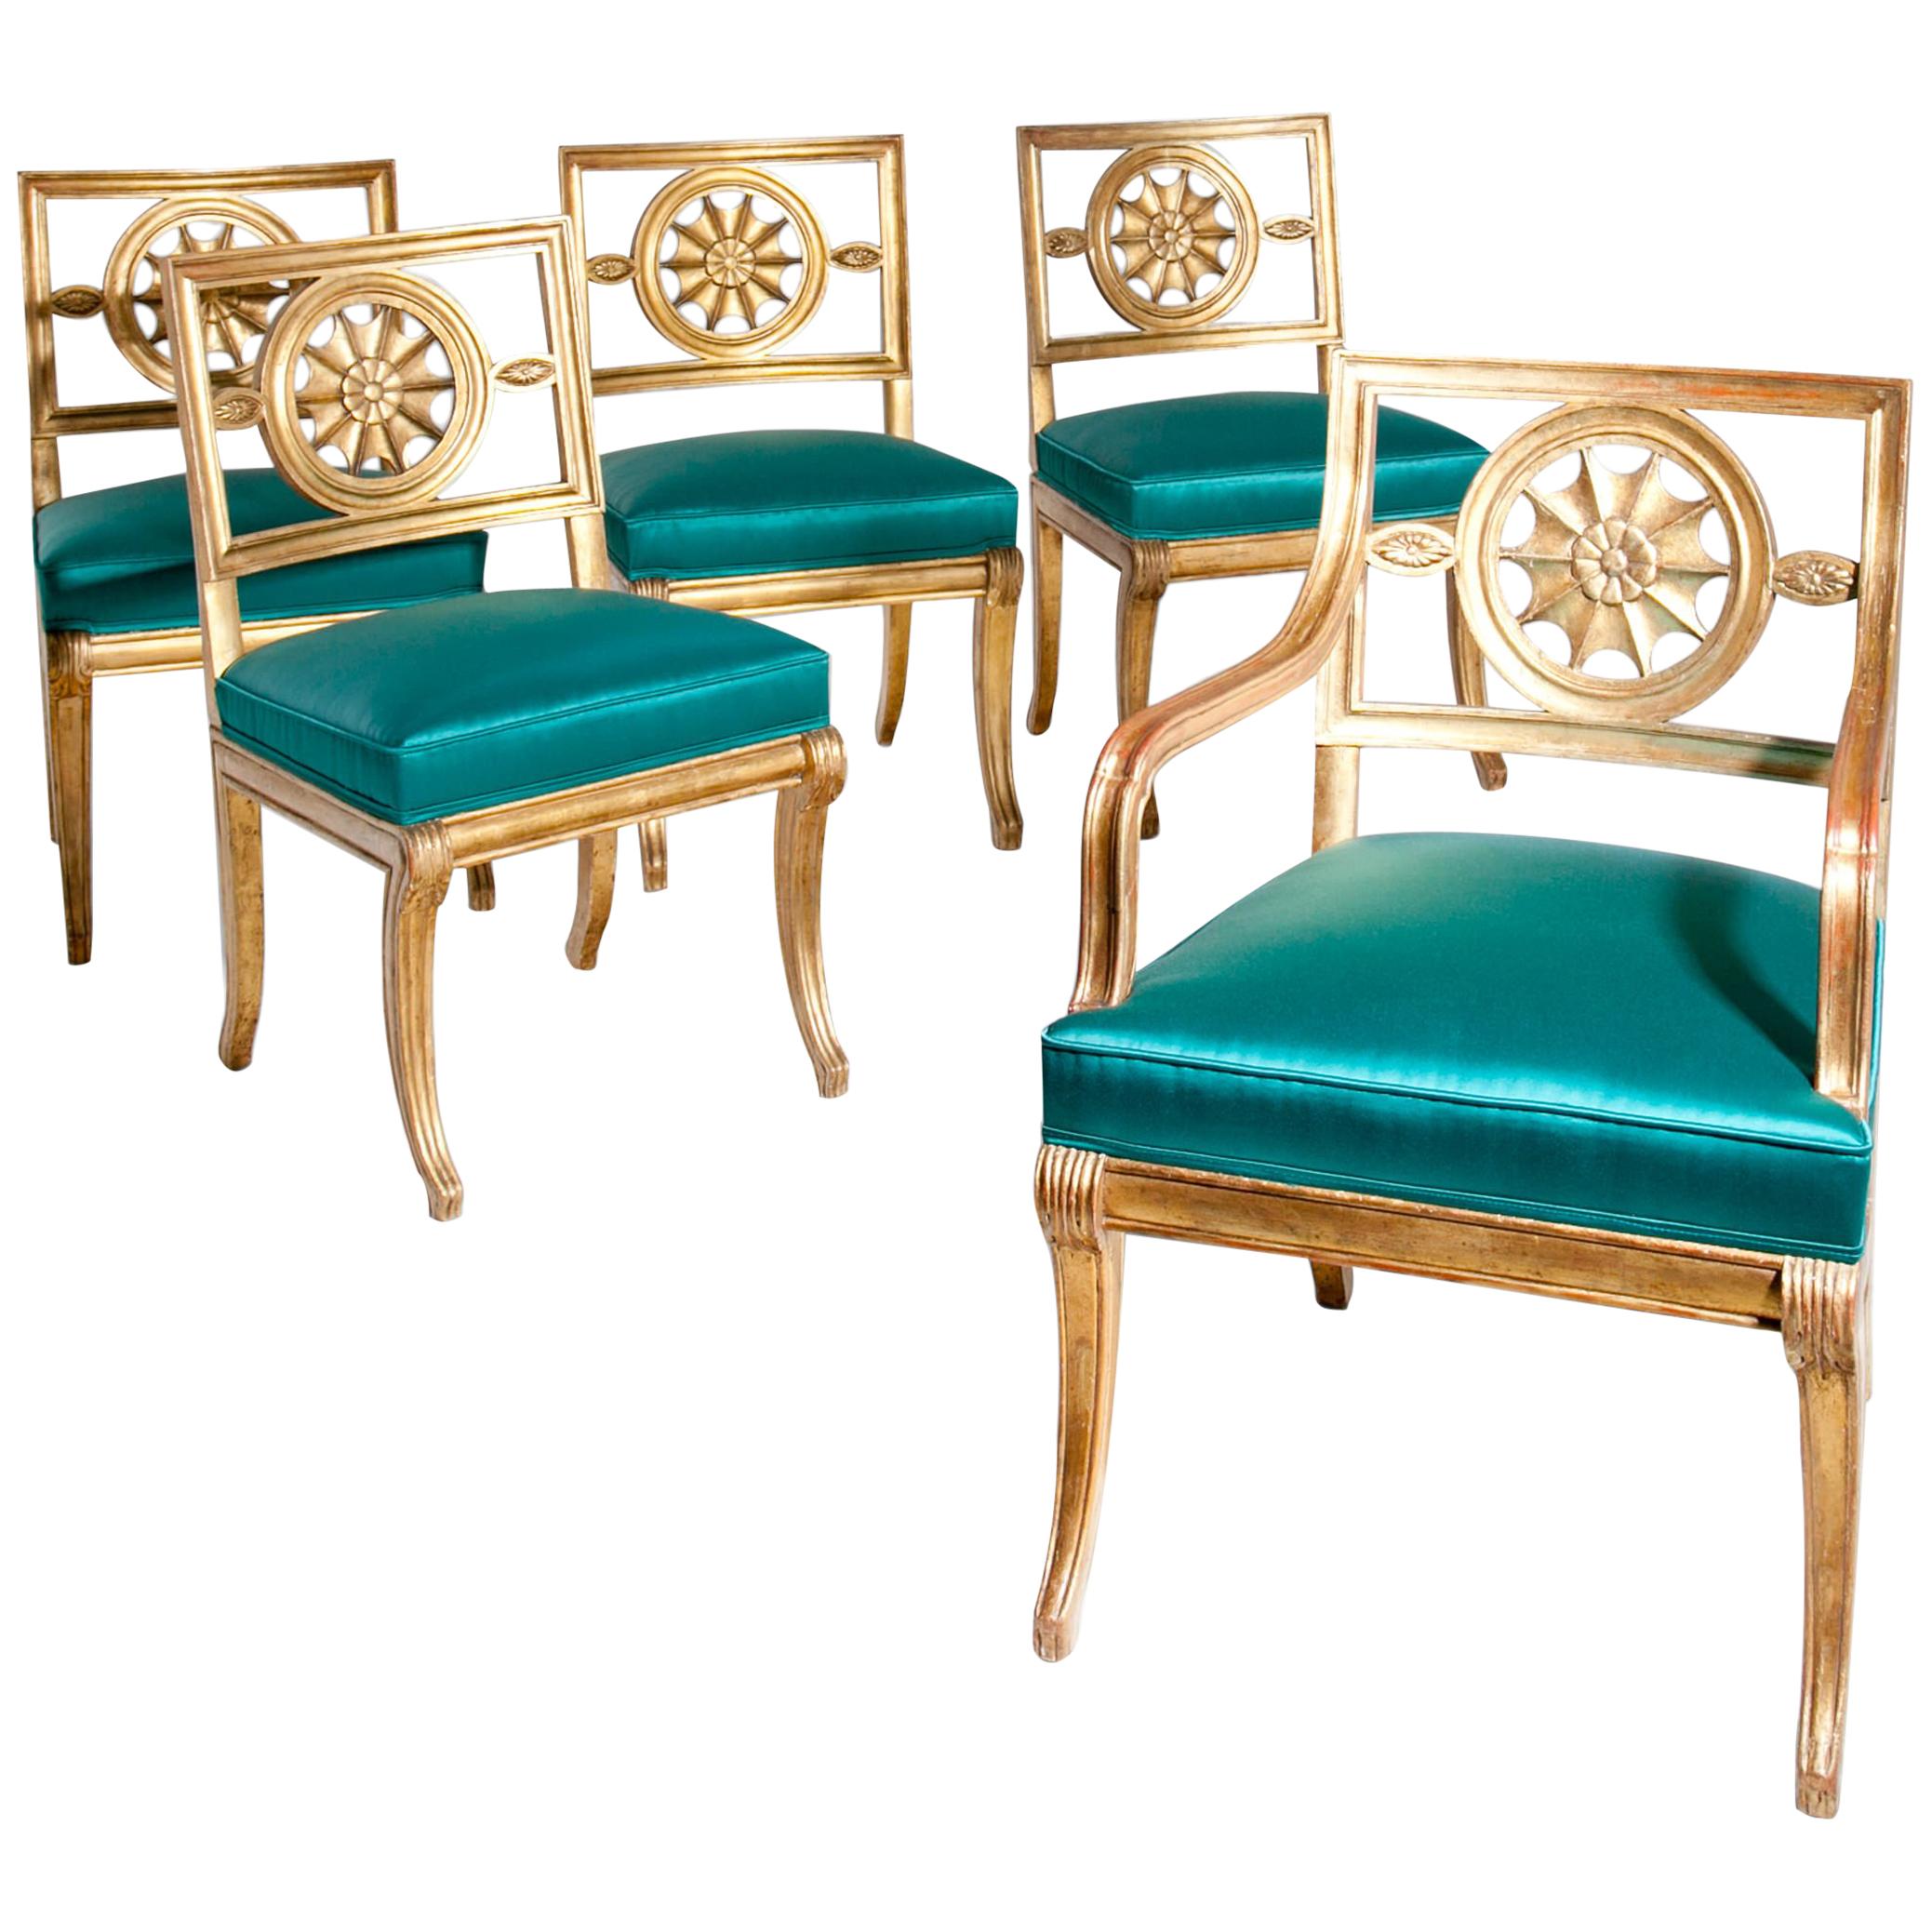 Neoclassical Chairs, Berlin First Half of the 19th Century